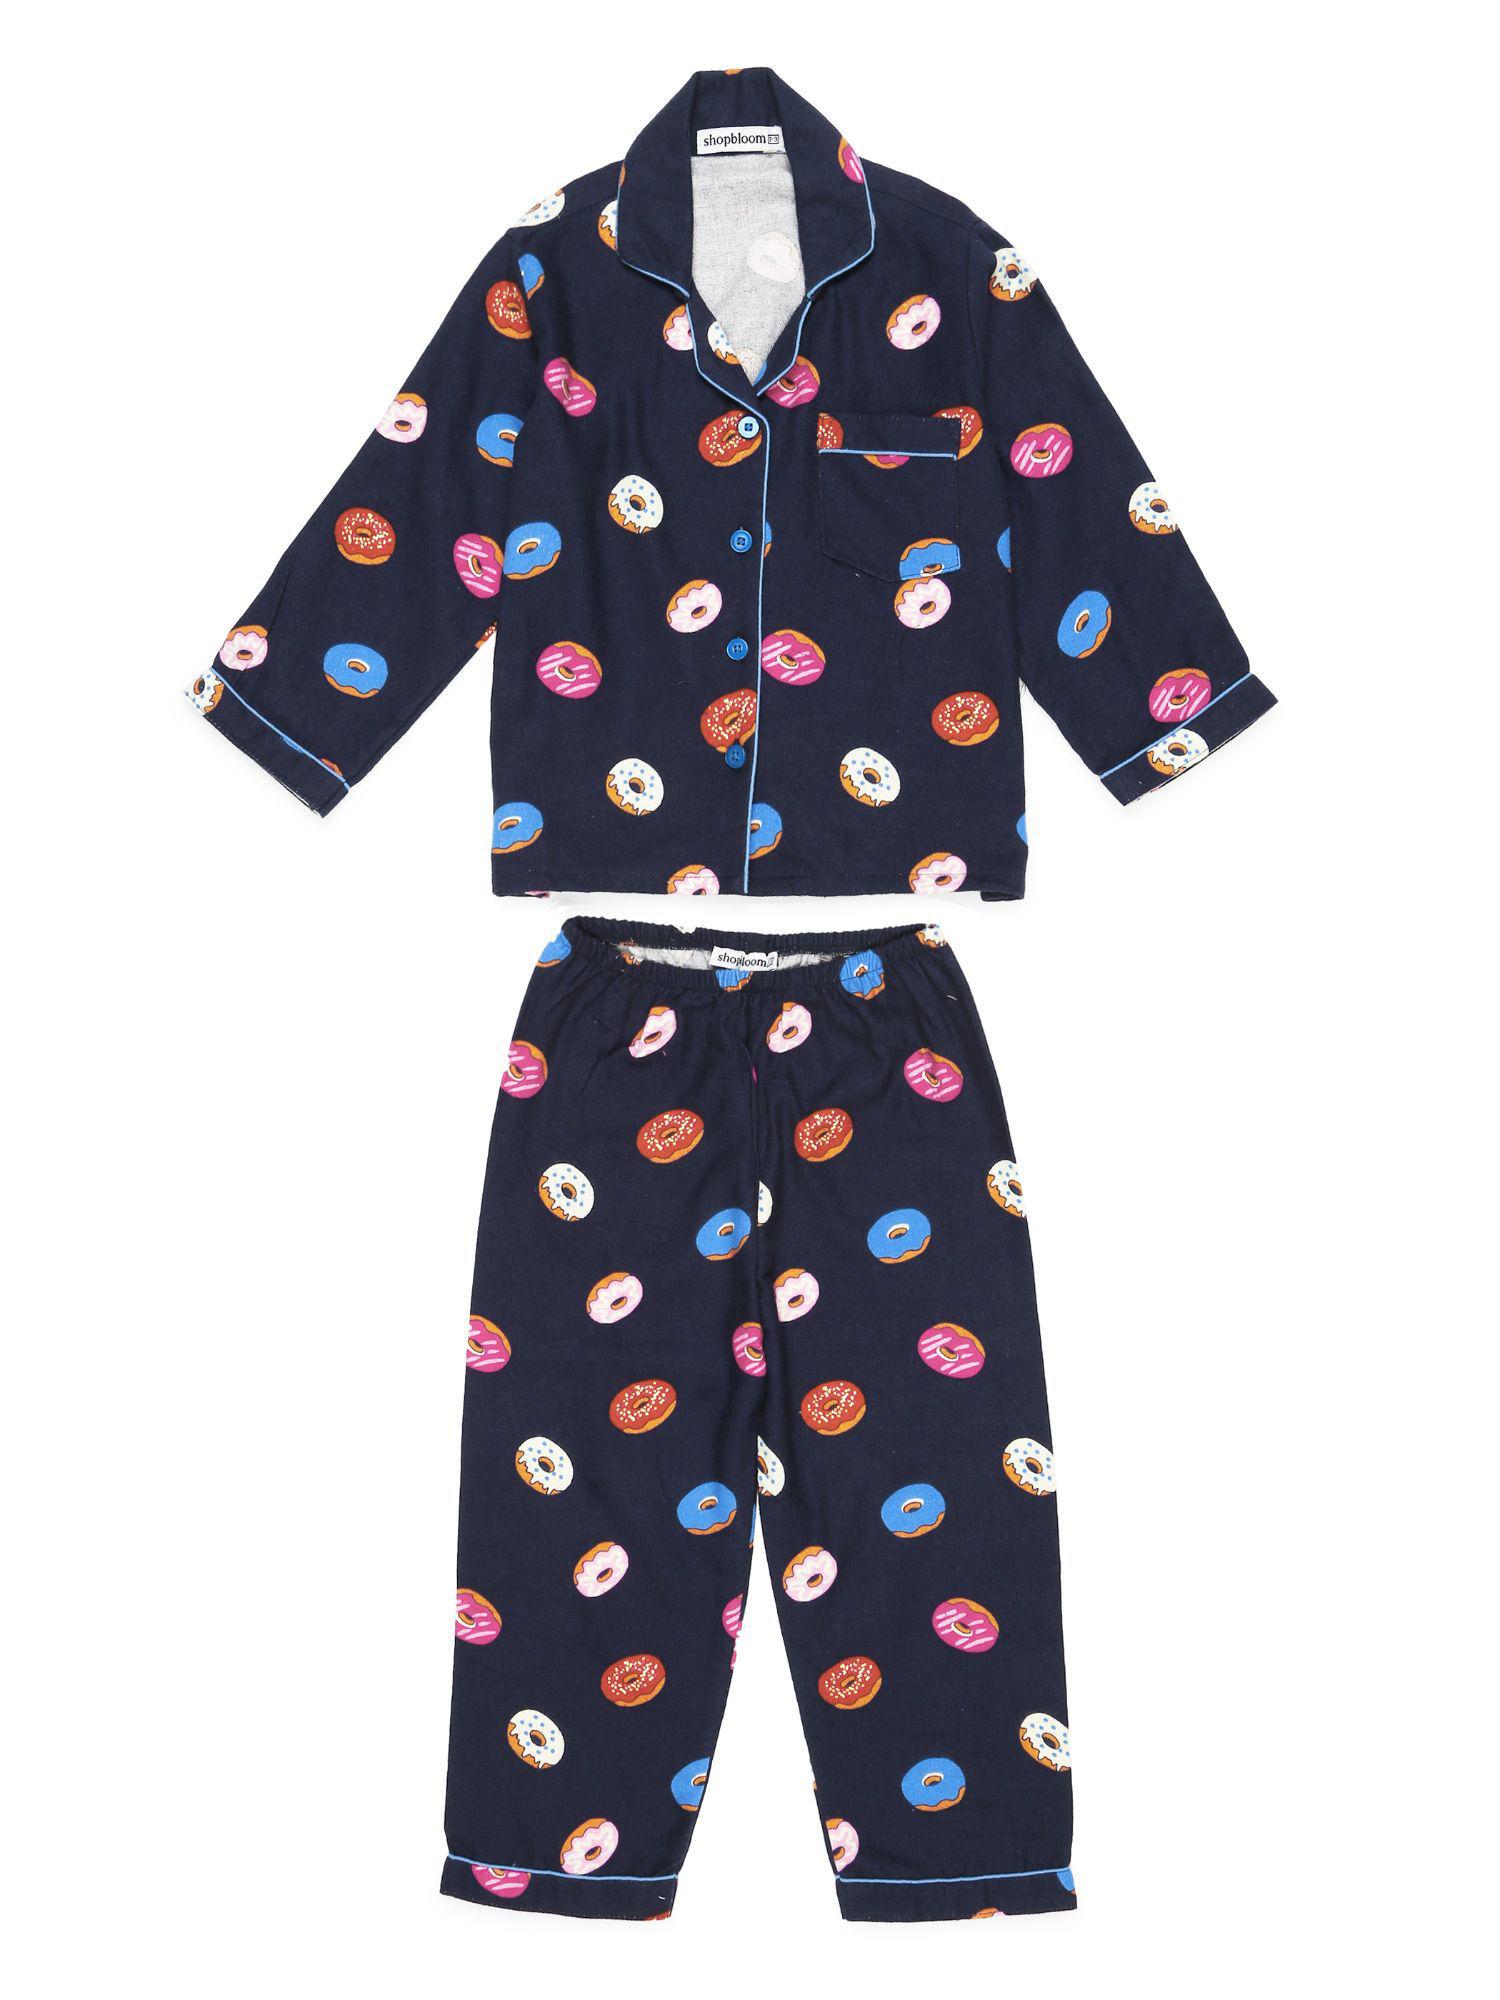 donut print cotton flannel long sleeve kid's night suit